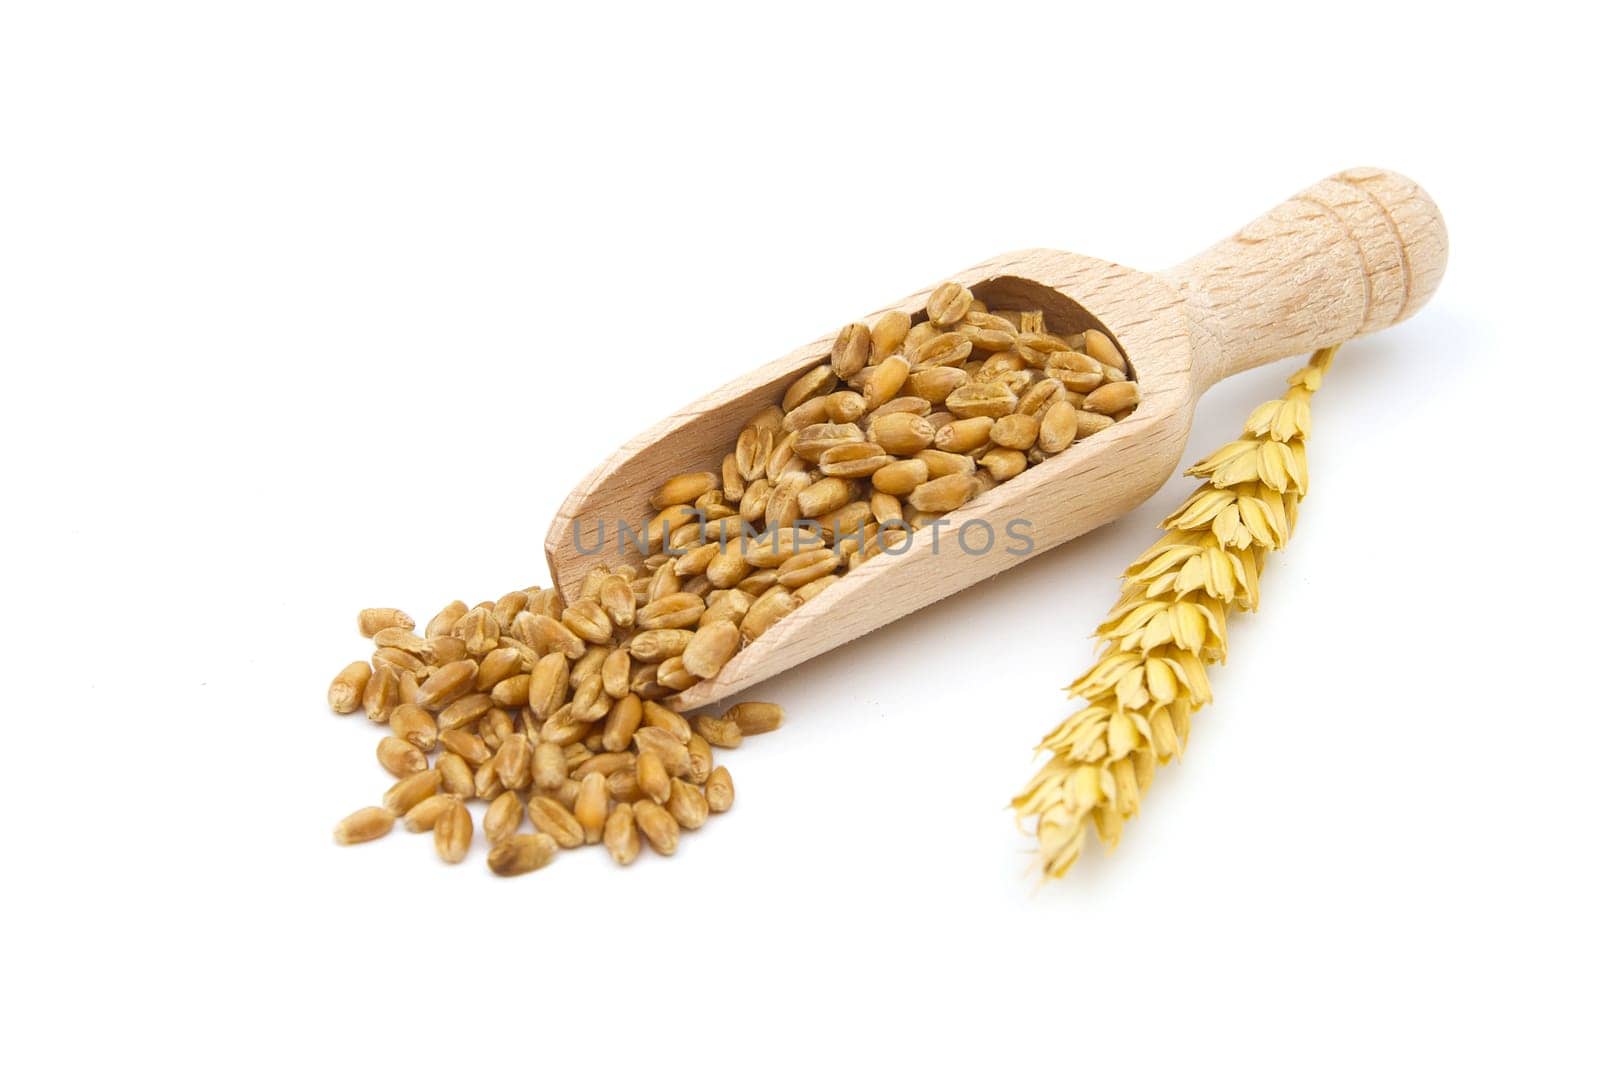 Wheat grain seeds spilling from wooden scoop by NetPix